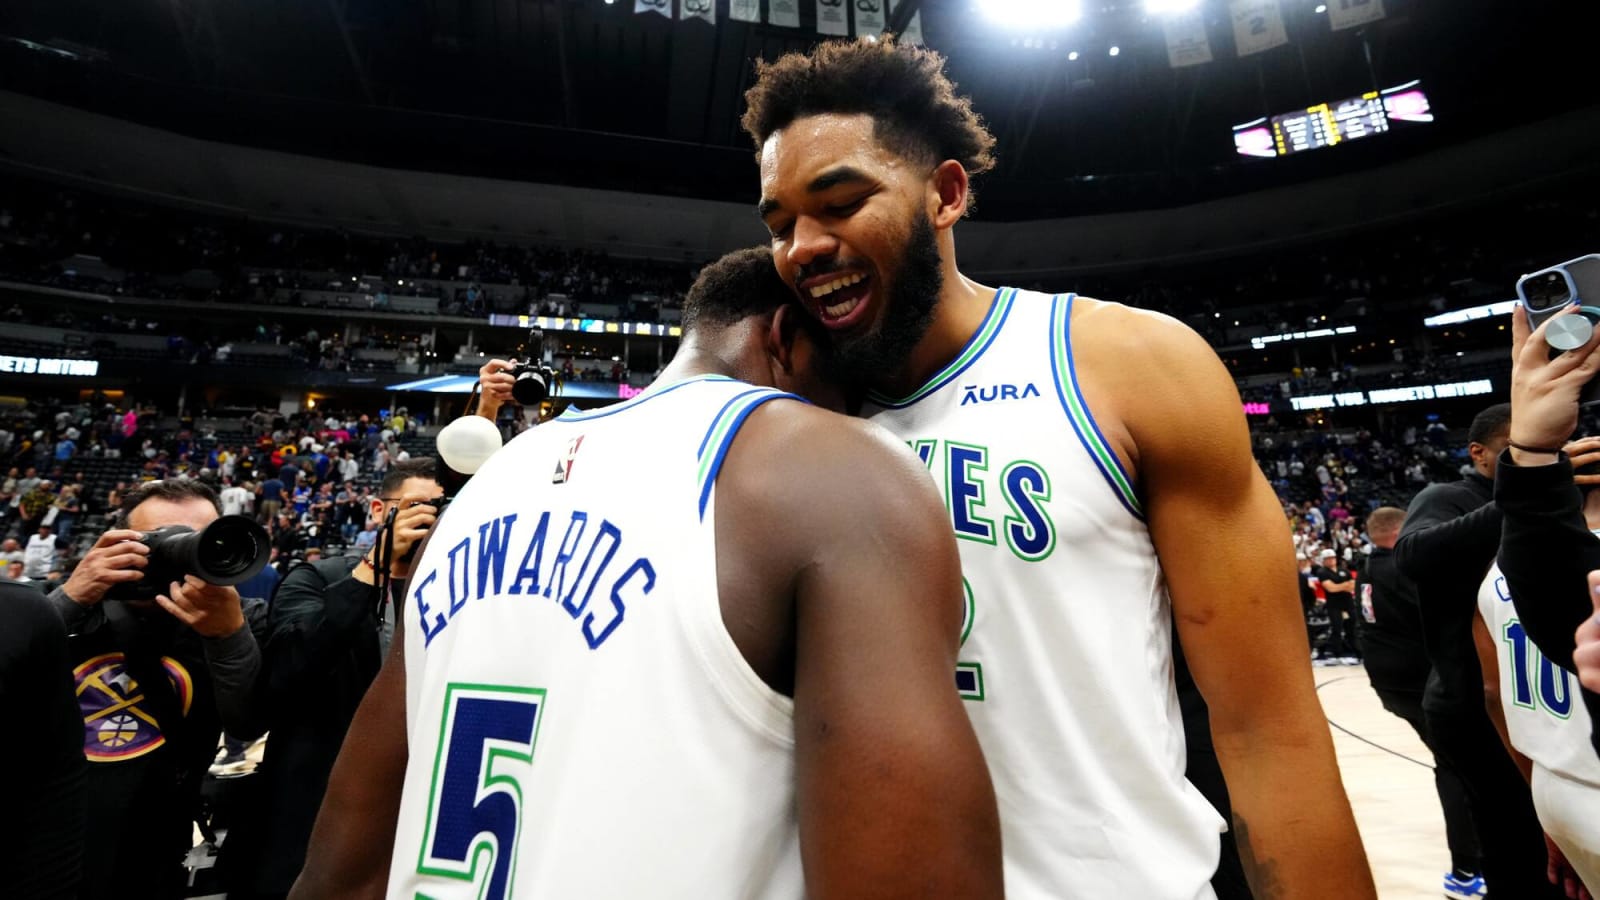 Ant Said it, but Karl-Anthony Towns Forced Charles Barkley to Bring His Ass to Minnesota